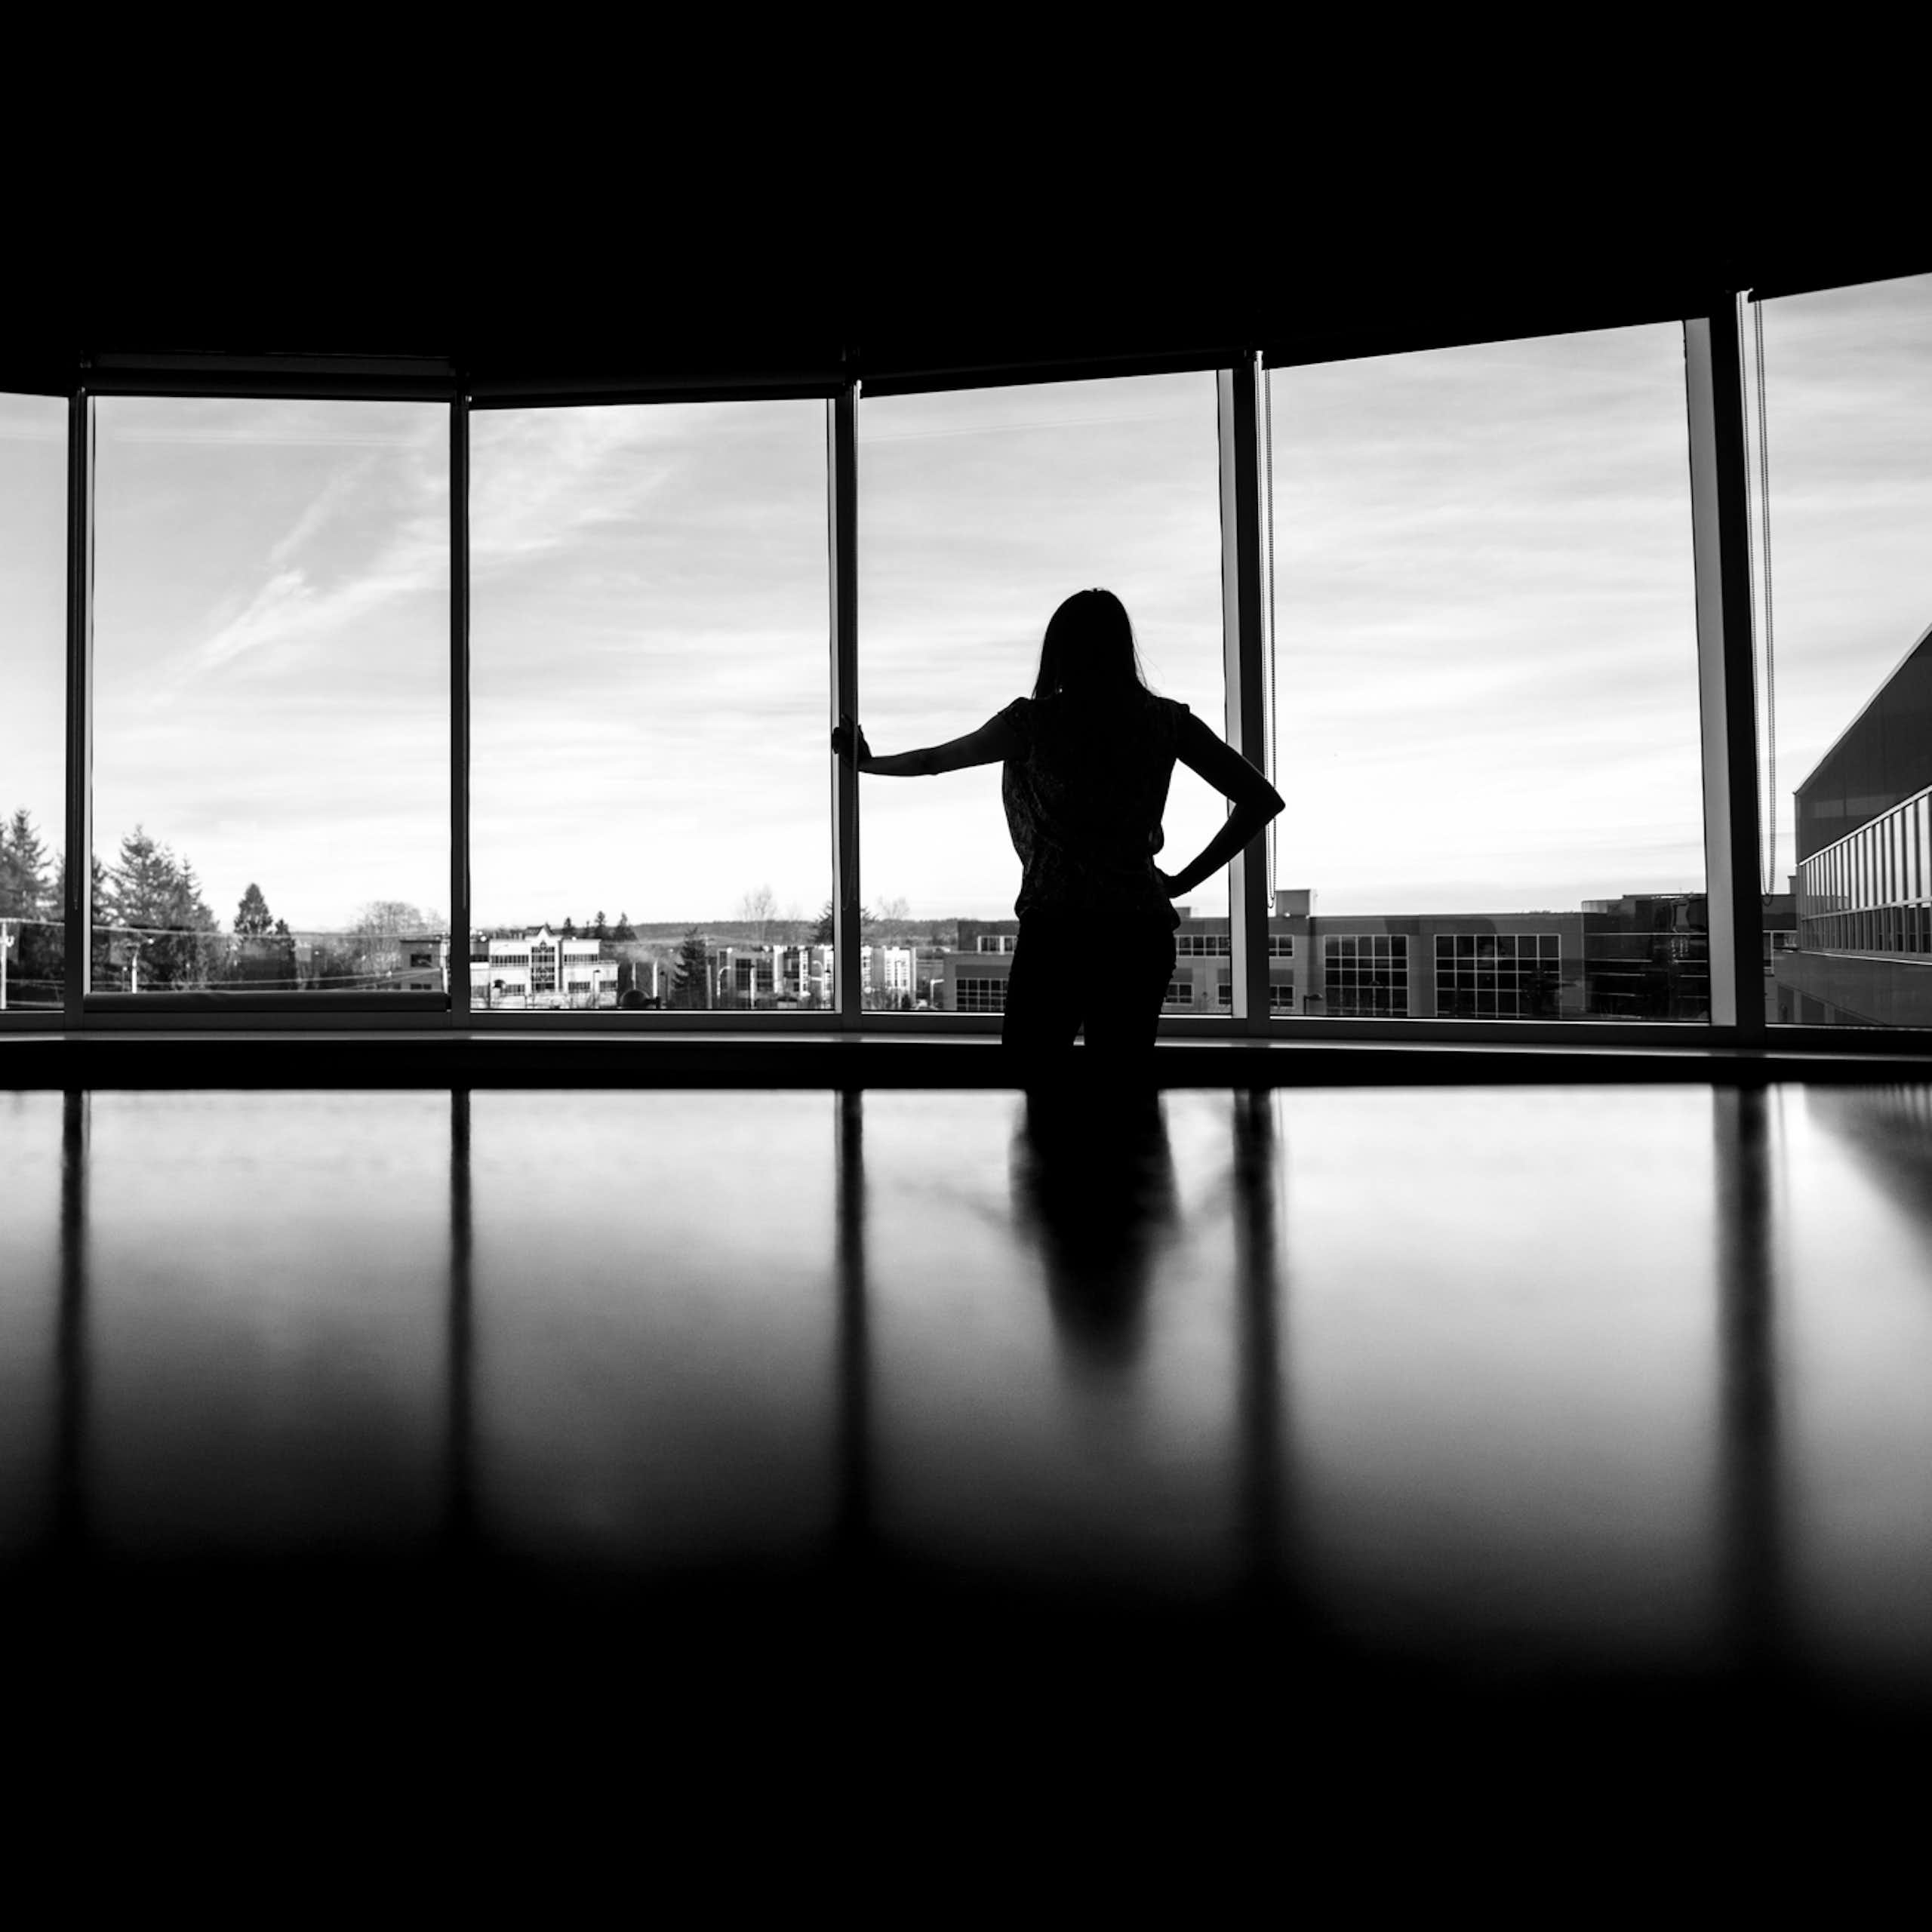 A person silhouetted against a window in an office environment